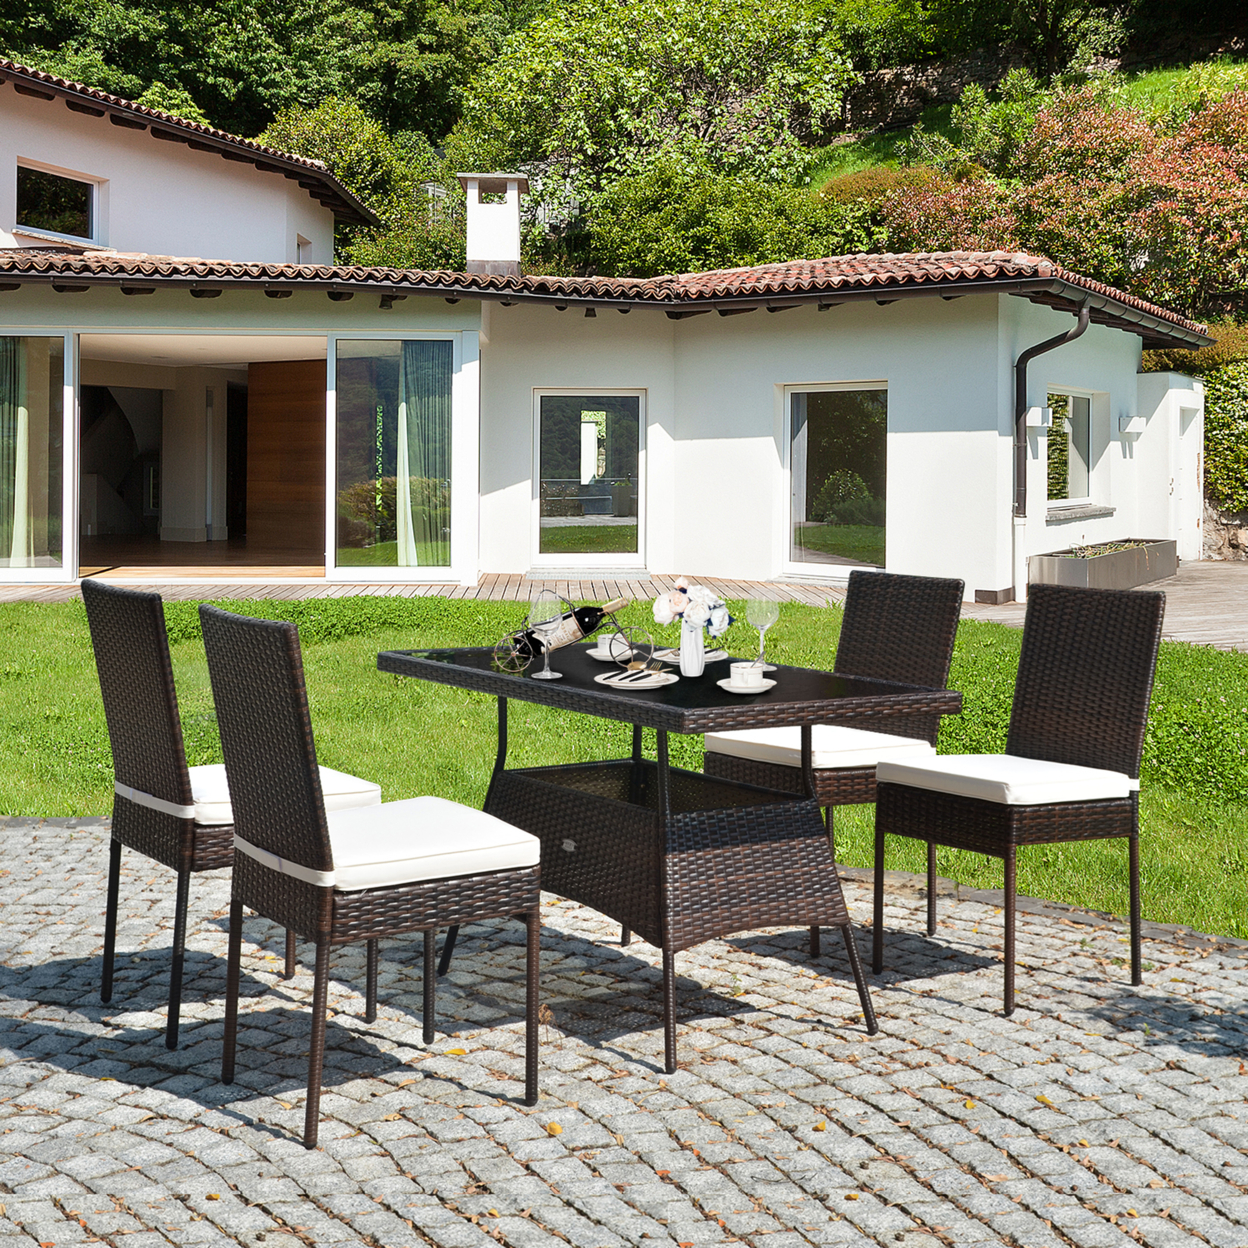 5PCS Rattan Patio Dining Table & Chair Set Outdoor Furniture Set W/ Cushion